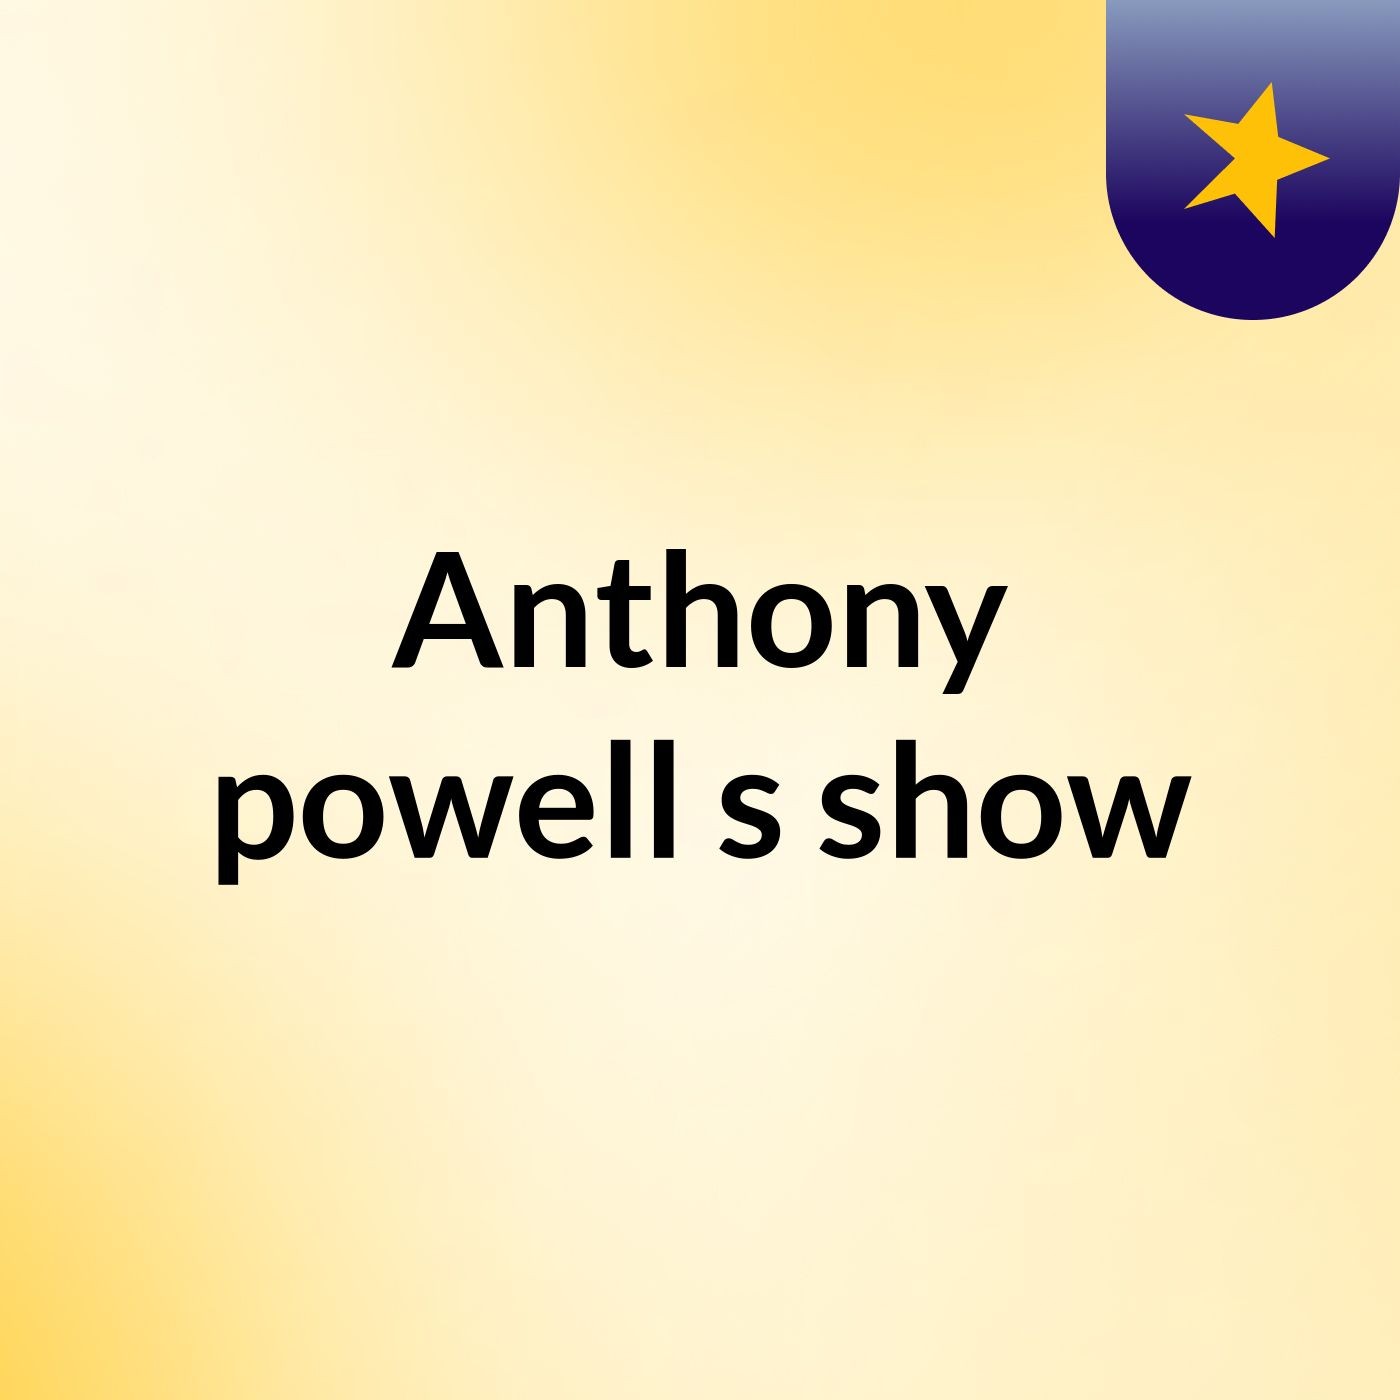 Anthony powell's show